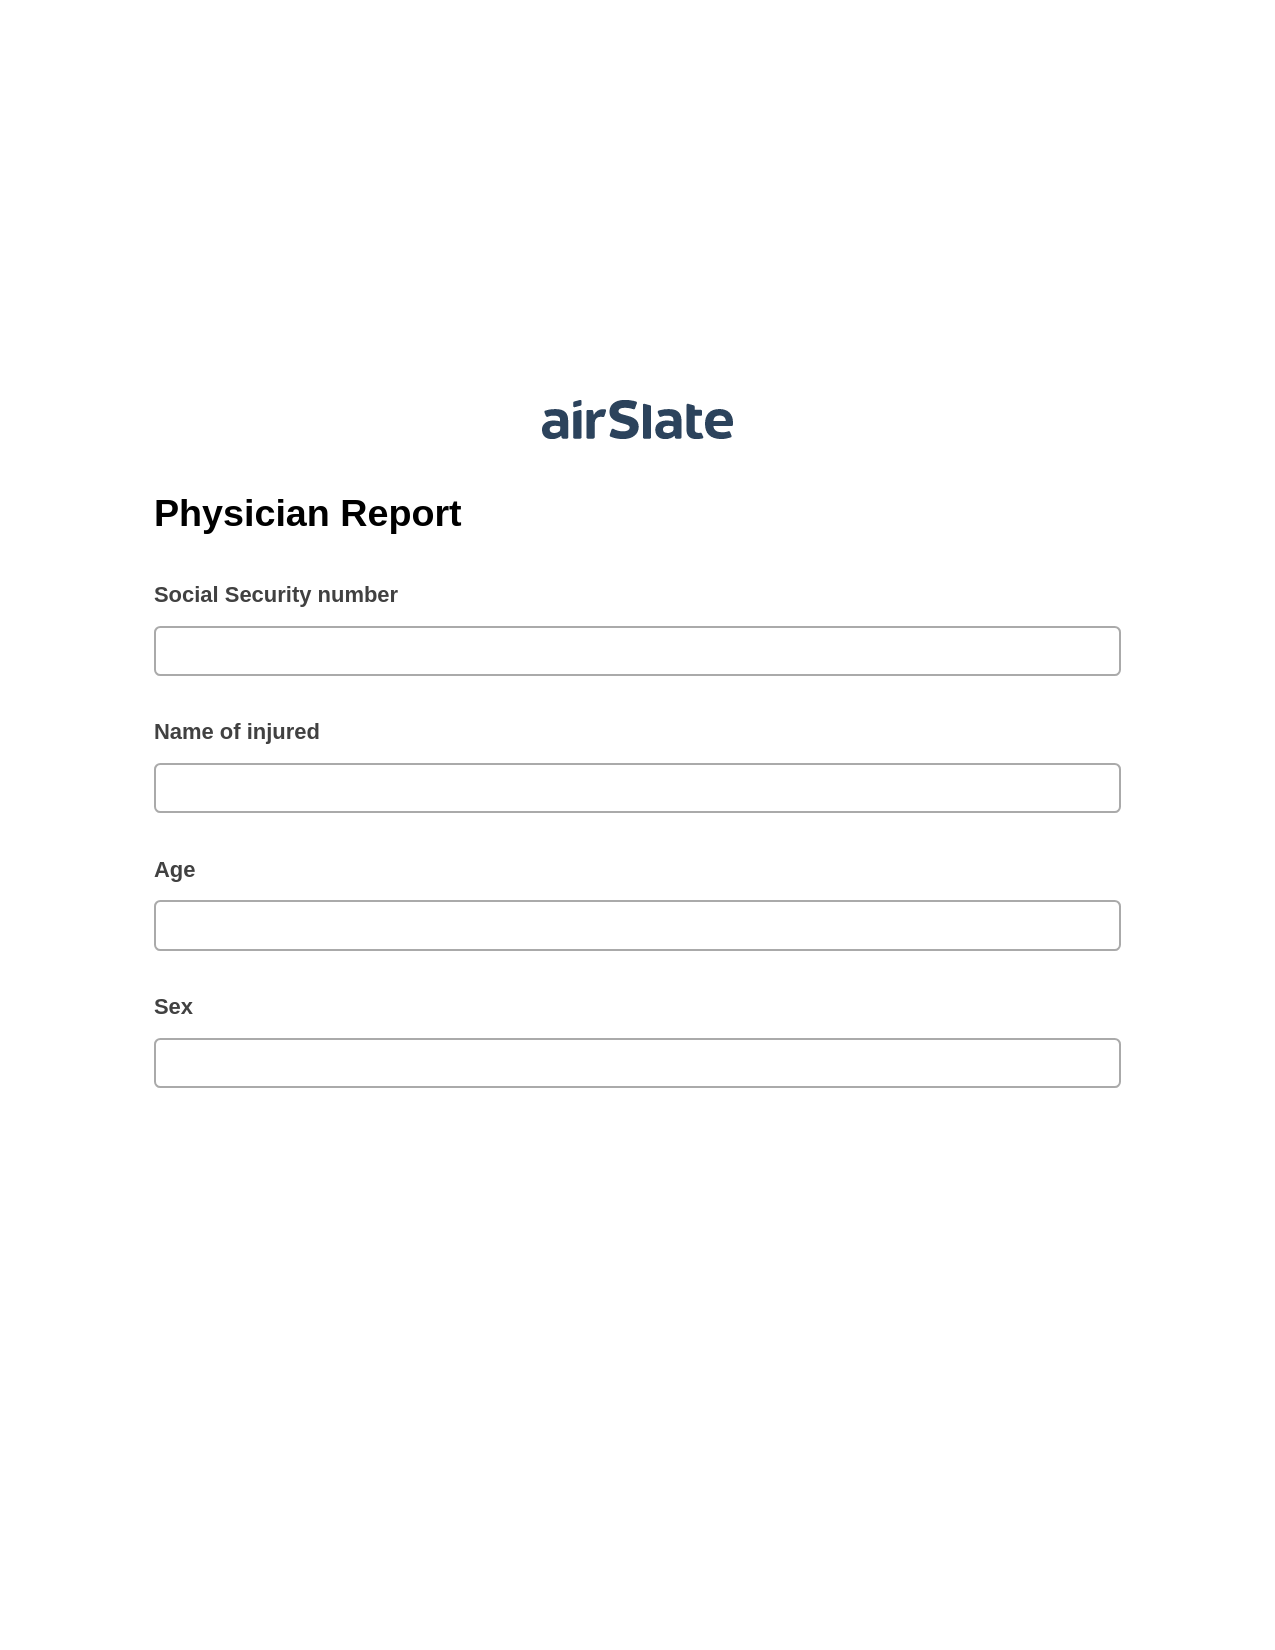 Physician Report Pre-fill from Excel Spreadsheet Bot, Export to MS Dynamics 365 Bot, Export to Smartsheet